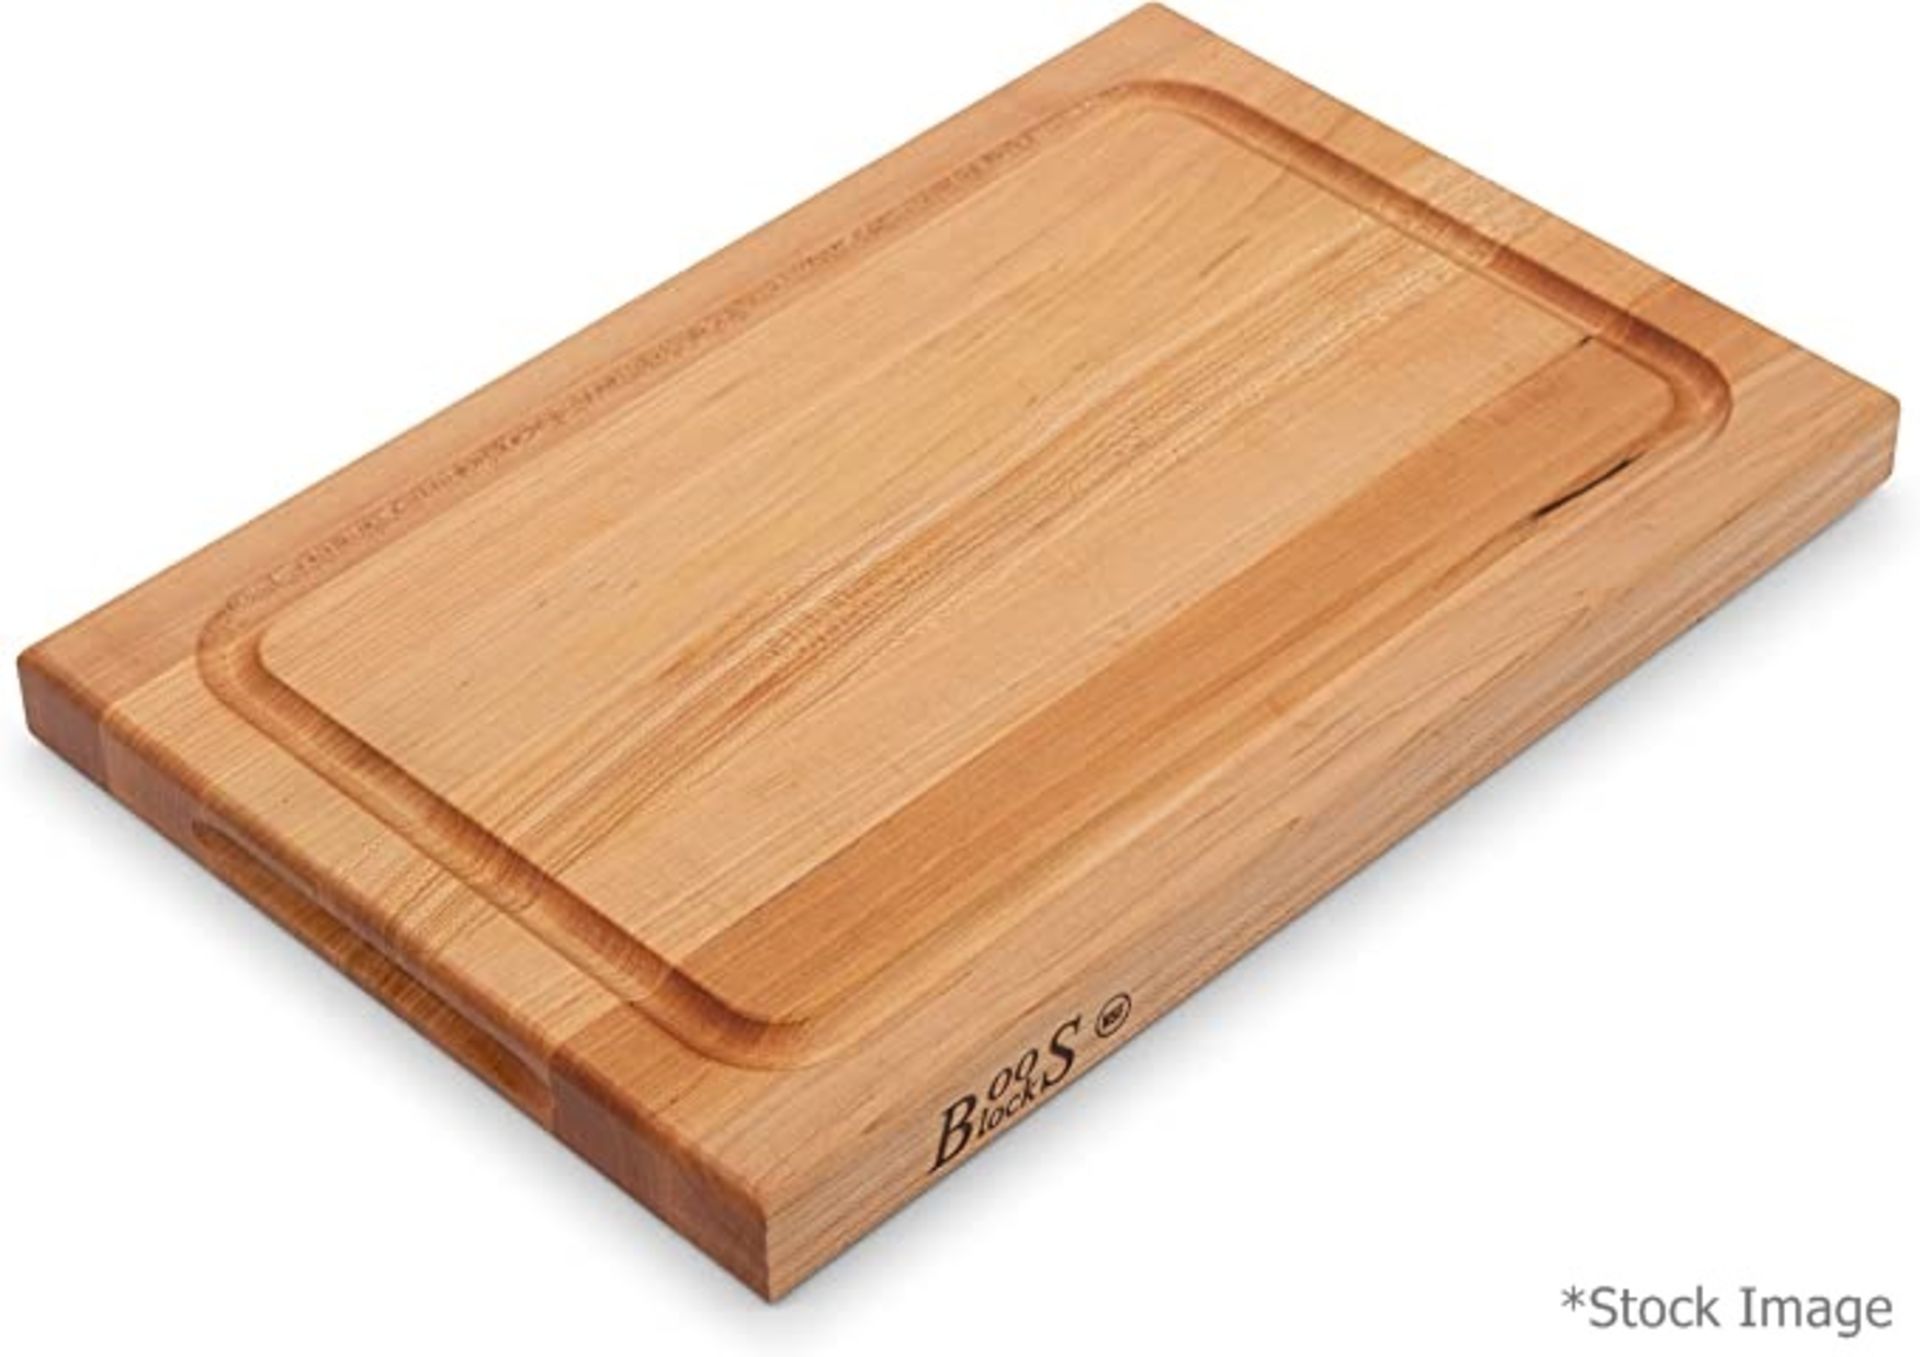 1 x JOHN BOOS 'Block' Reversible Maple Wood Chopping Board with Juice Groove - Image 2 of 6